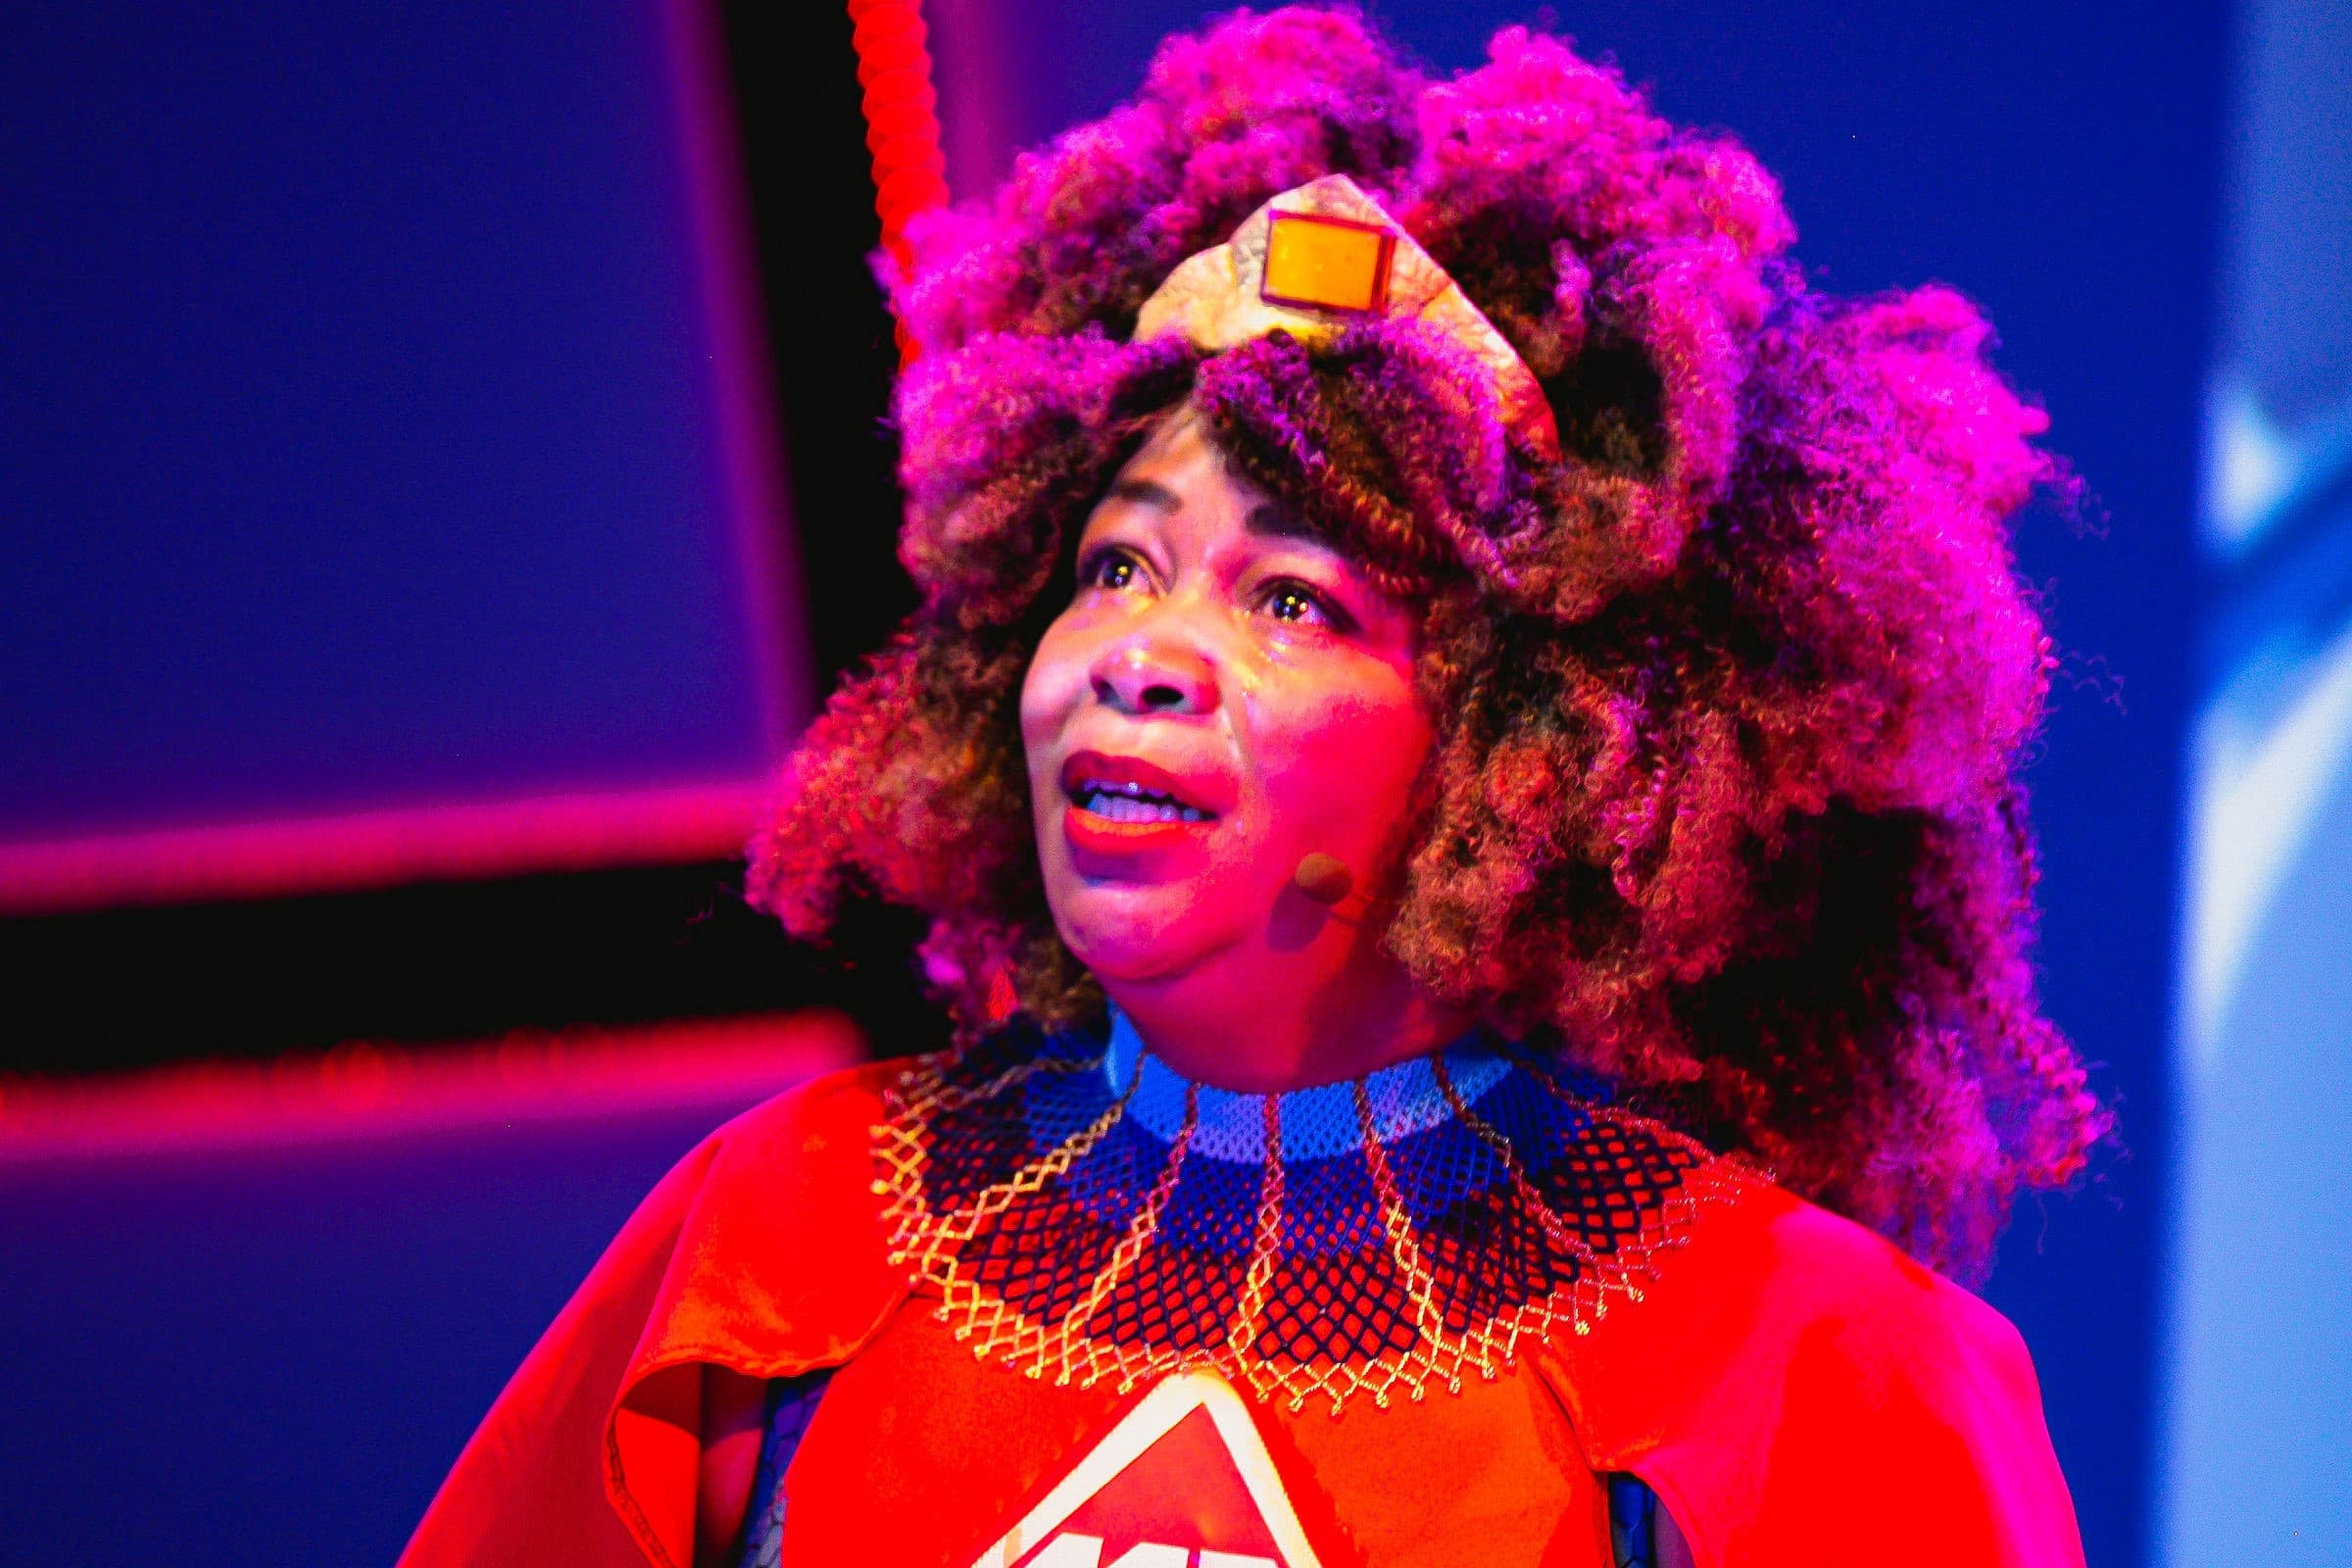 Ramona Lisa Alexander plays the title role in "Black Super Hero Magic Mama" at the Boston Public Library. (Courtesy Lauren Miller)